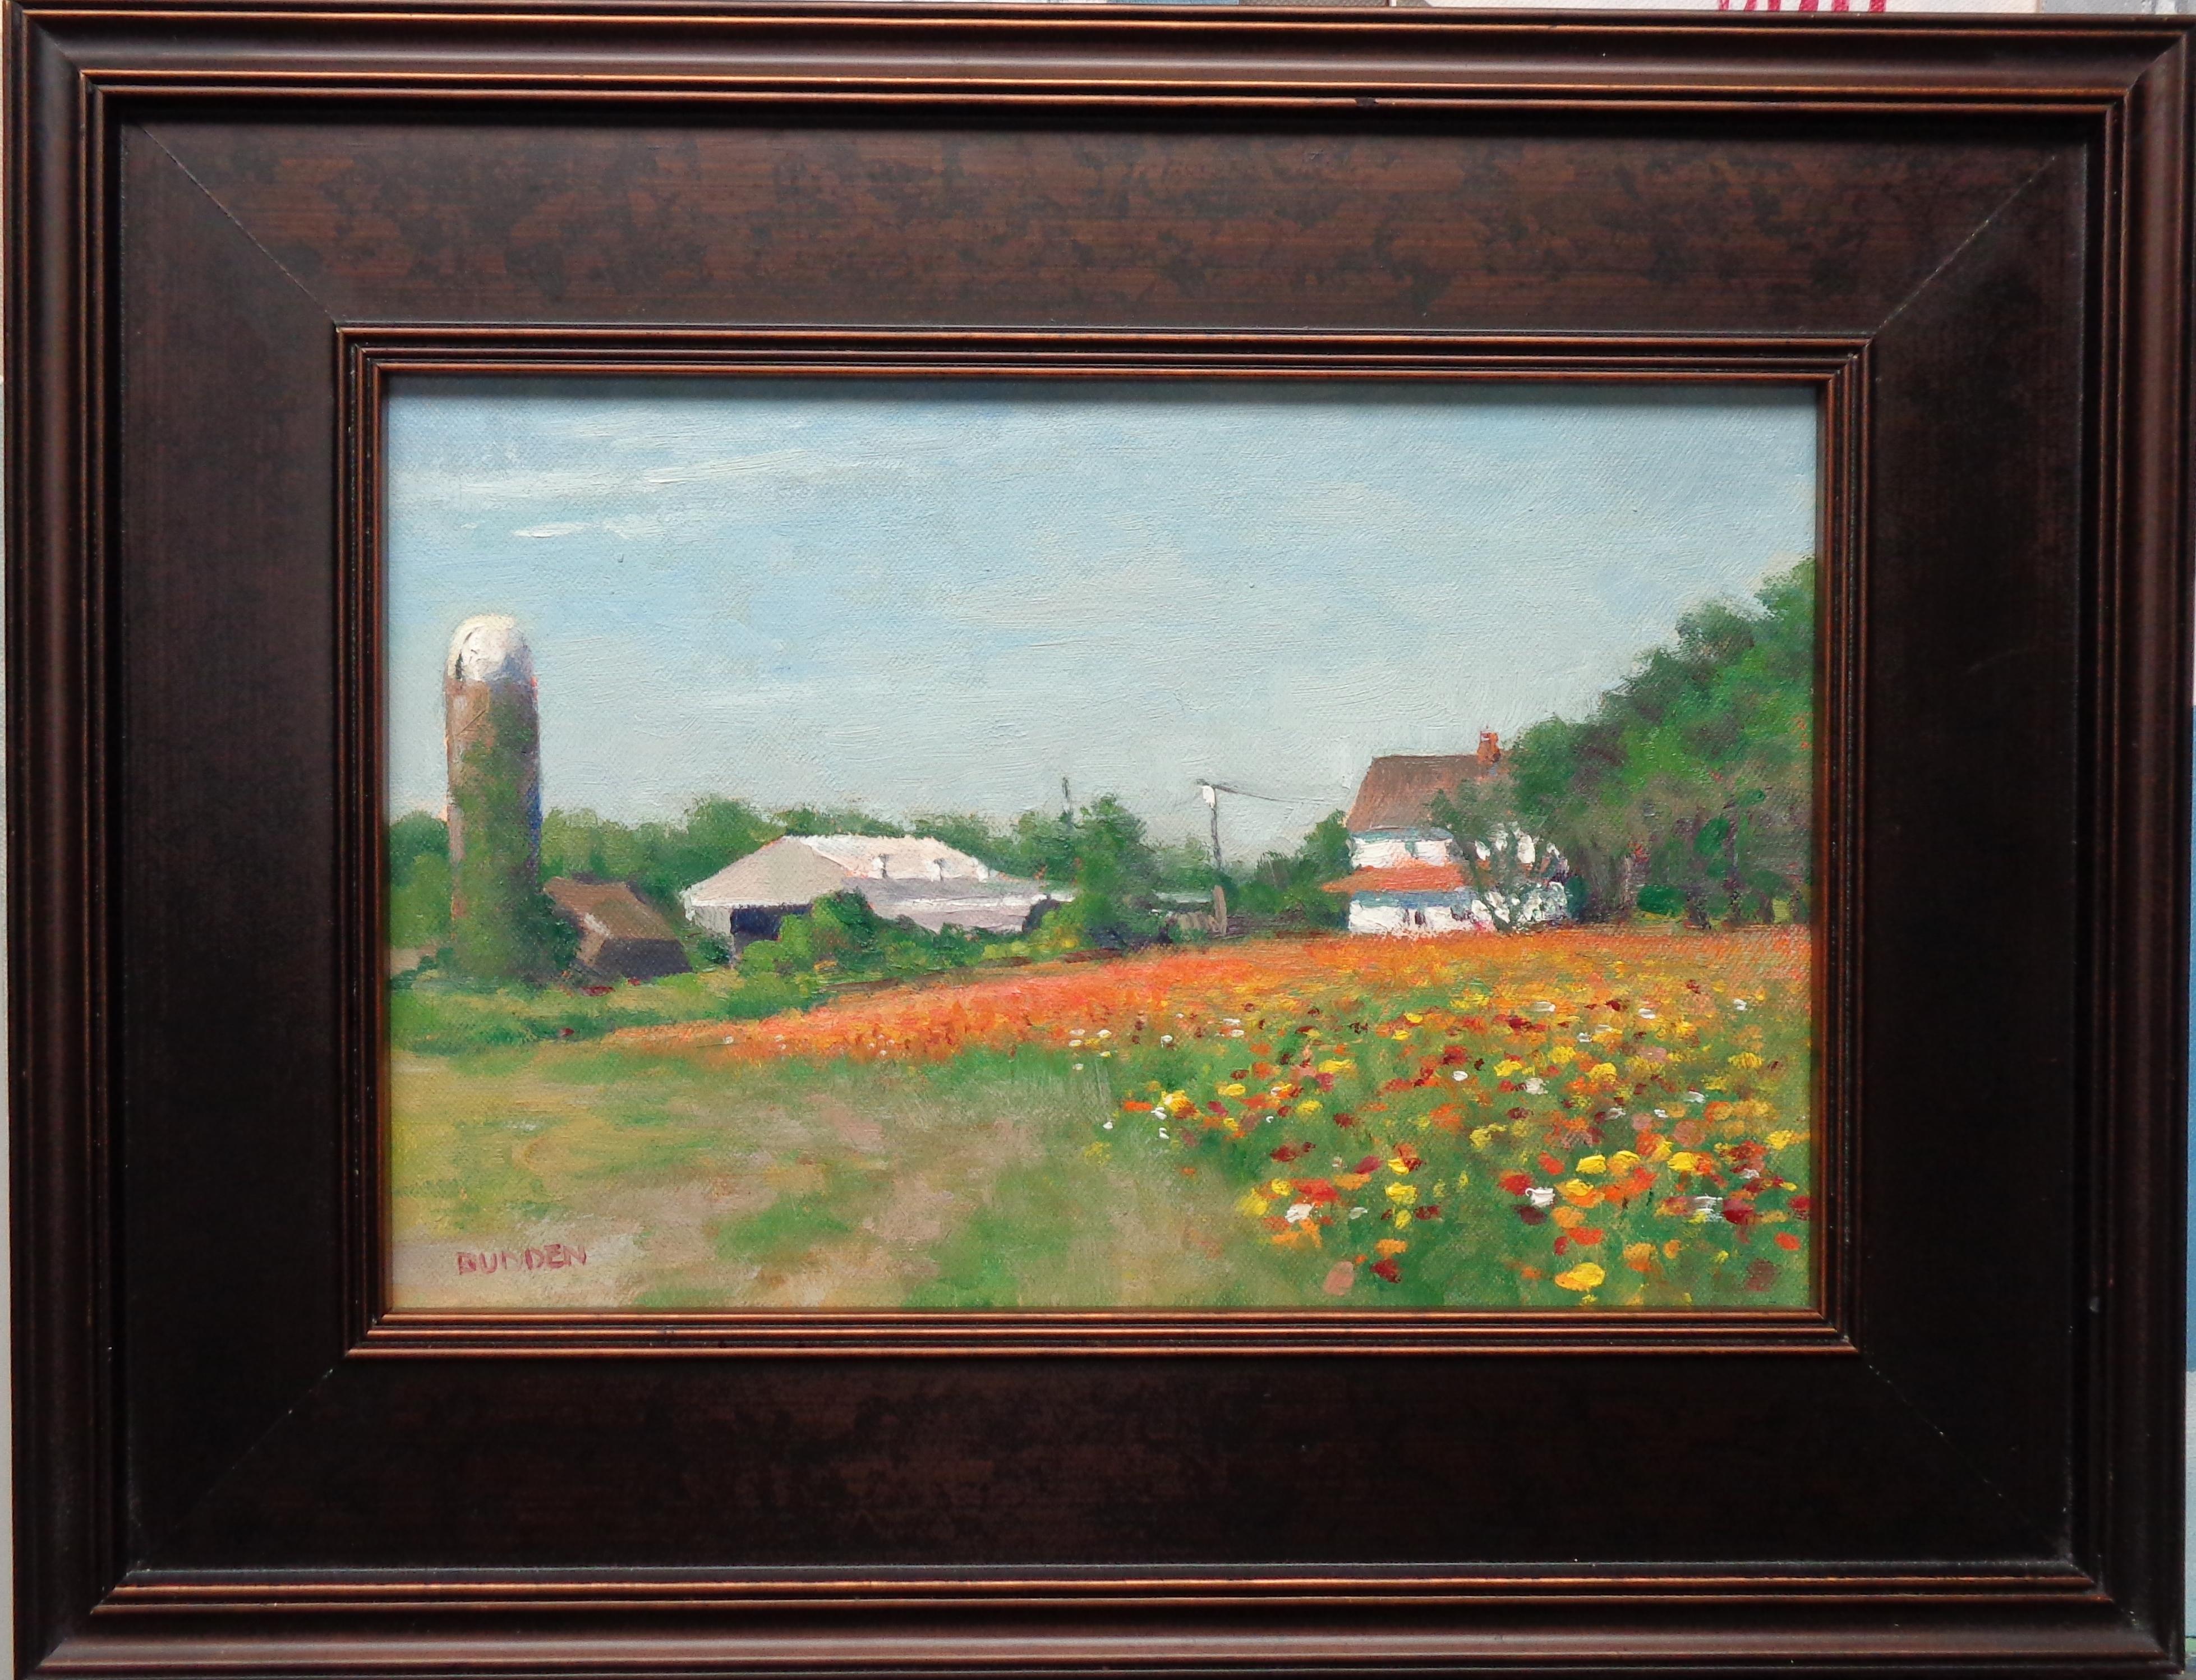 An oil painting on canvas that showcases the beautiful light of a summer day shinning on a field of flowers. This is one of my favorite places to set up my easel and paint near my home in Chesterfield NJ. My friends grow and sell their flowers along